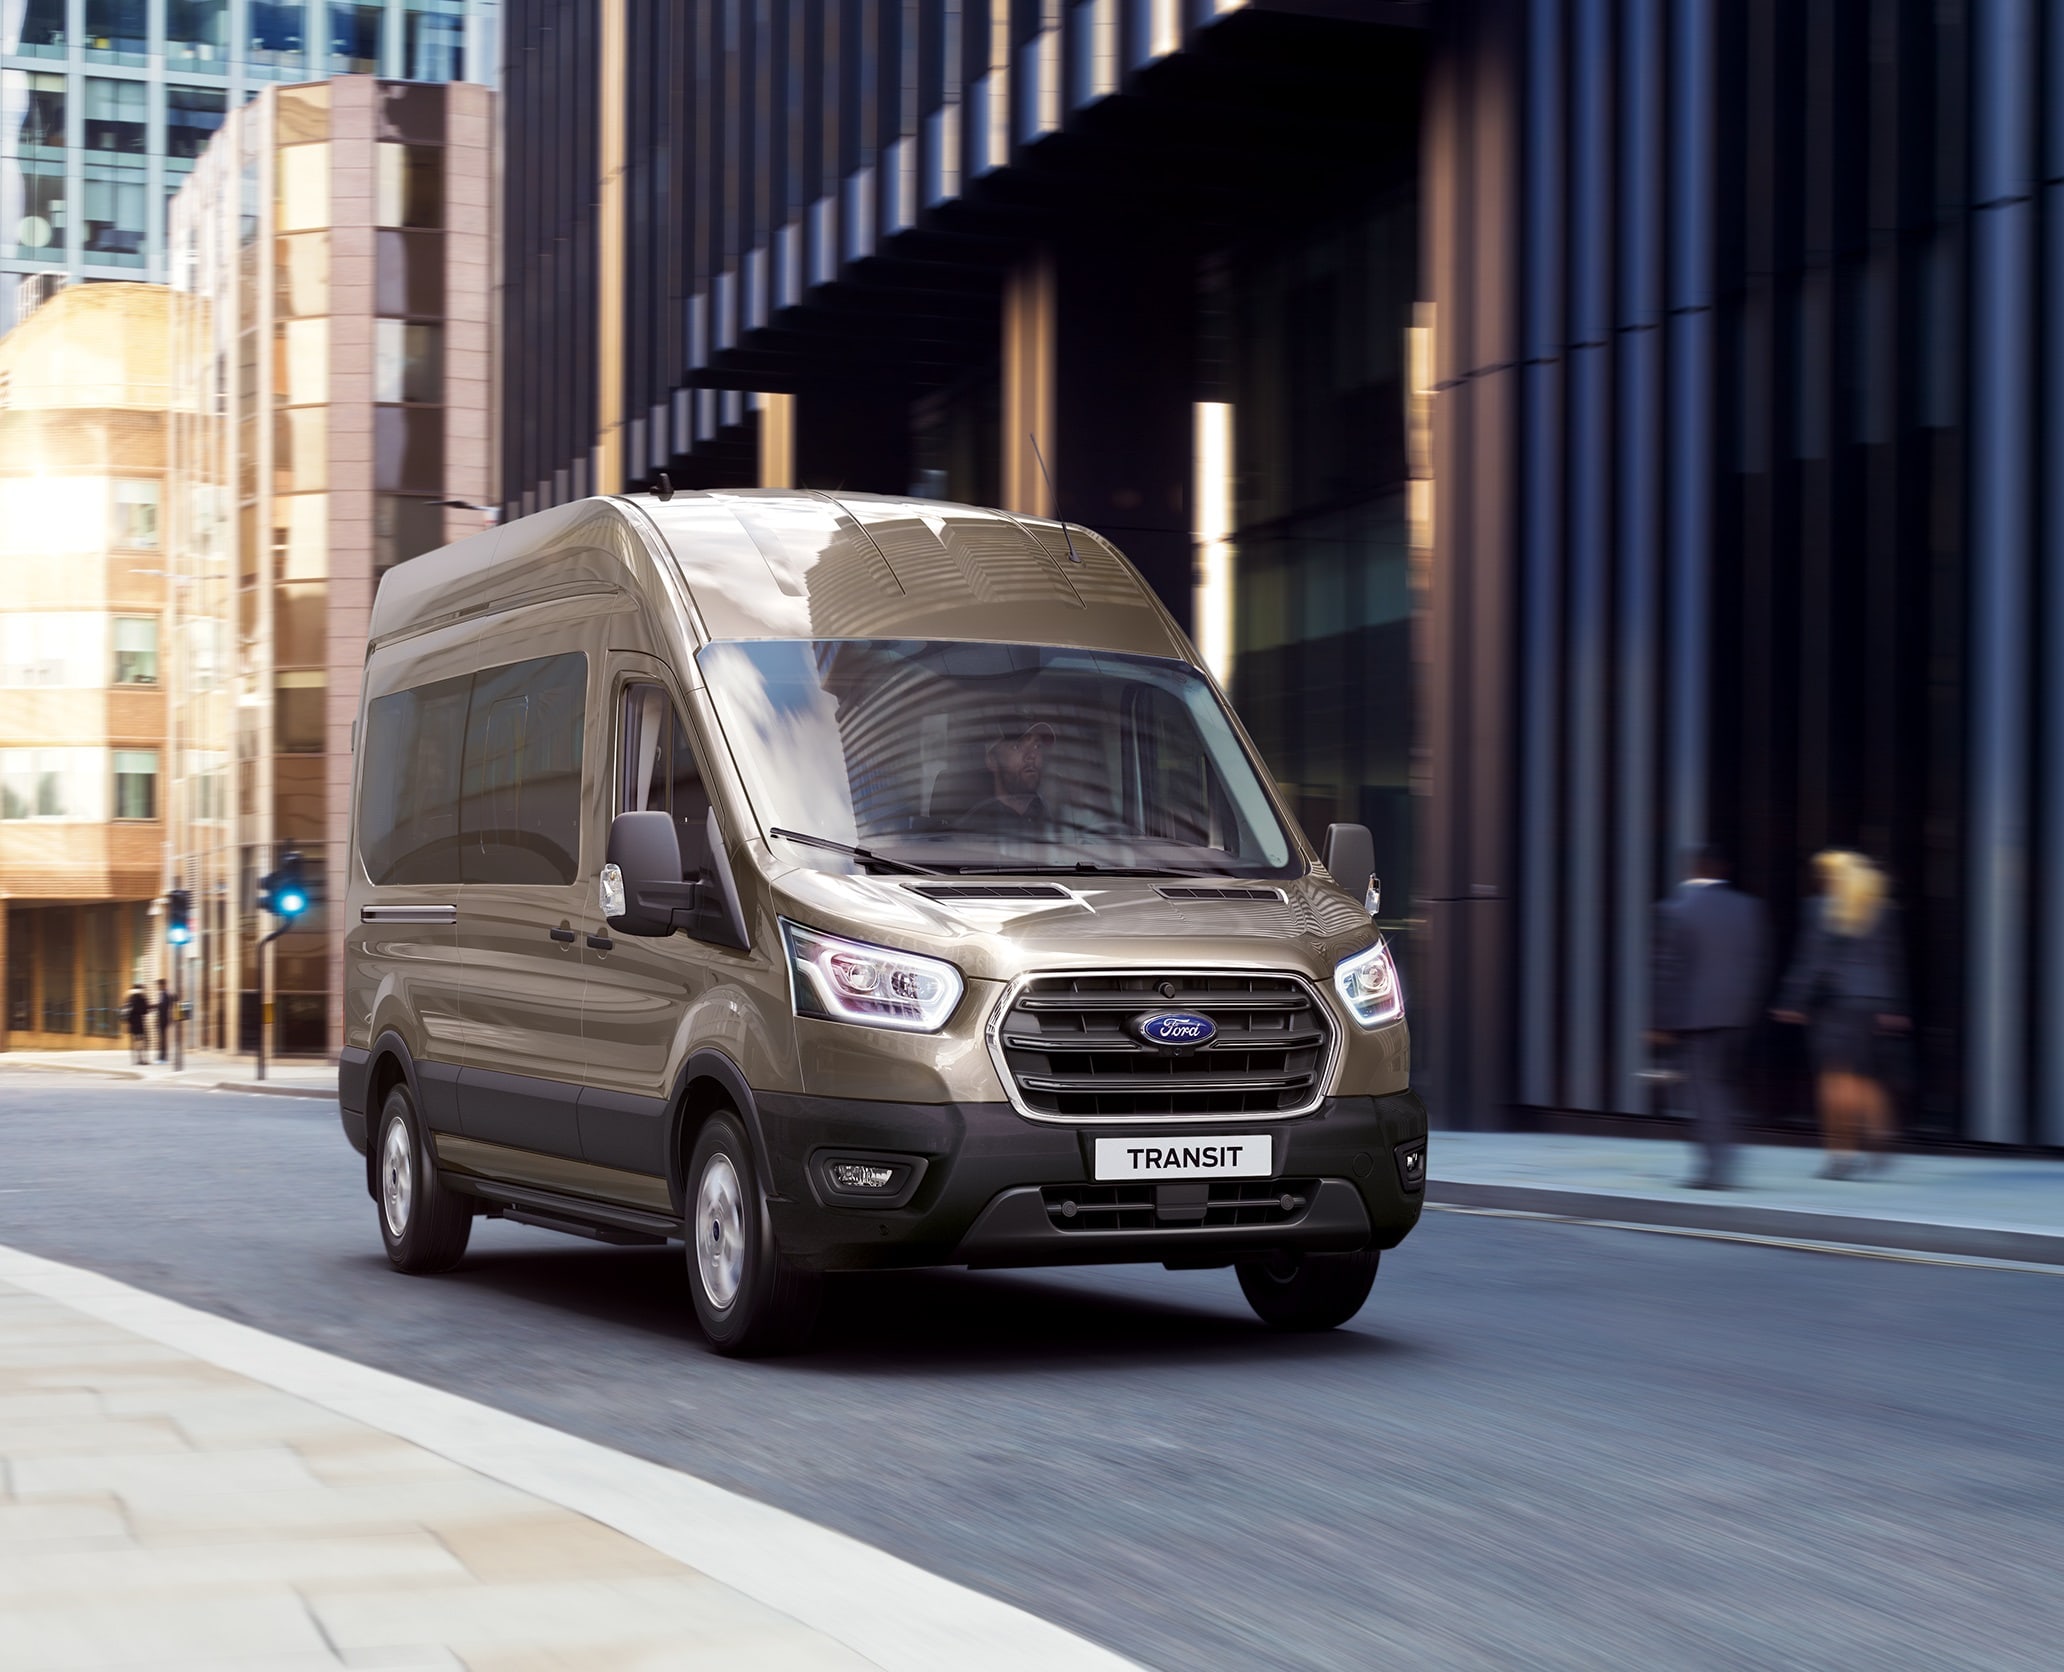 Форд транзит 2021г. Ford Transit 2021. Ford Transit 10. Ford Transit 2023. Ford Transit новый.